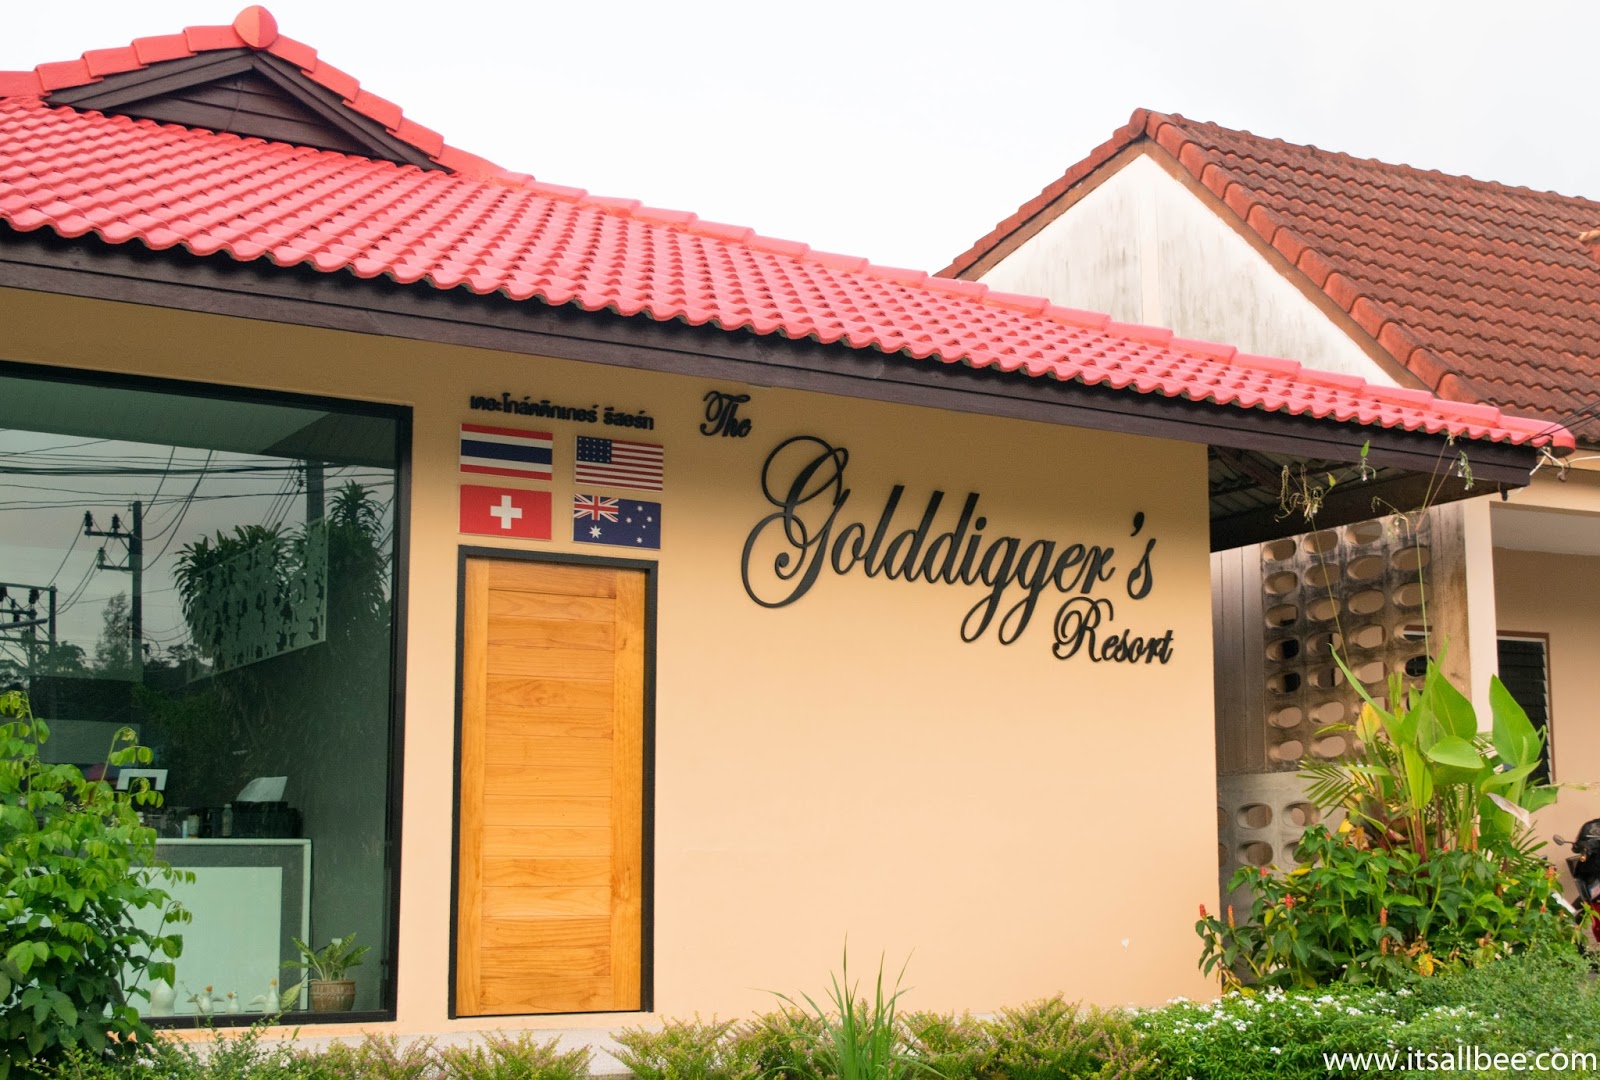 Best Place To Stay In Phuket + Gold Diggers Resort Review